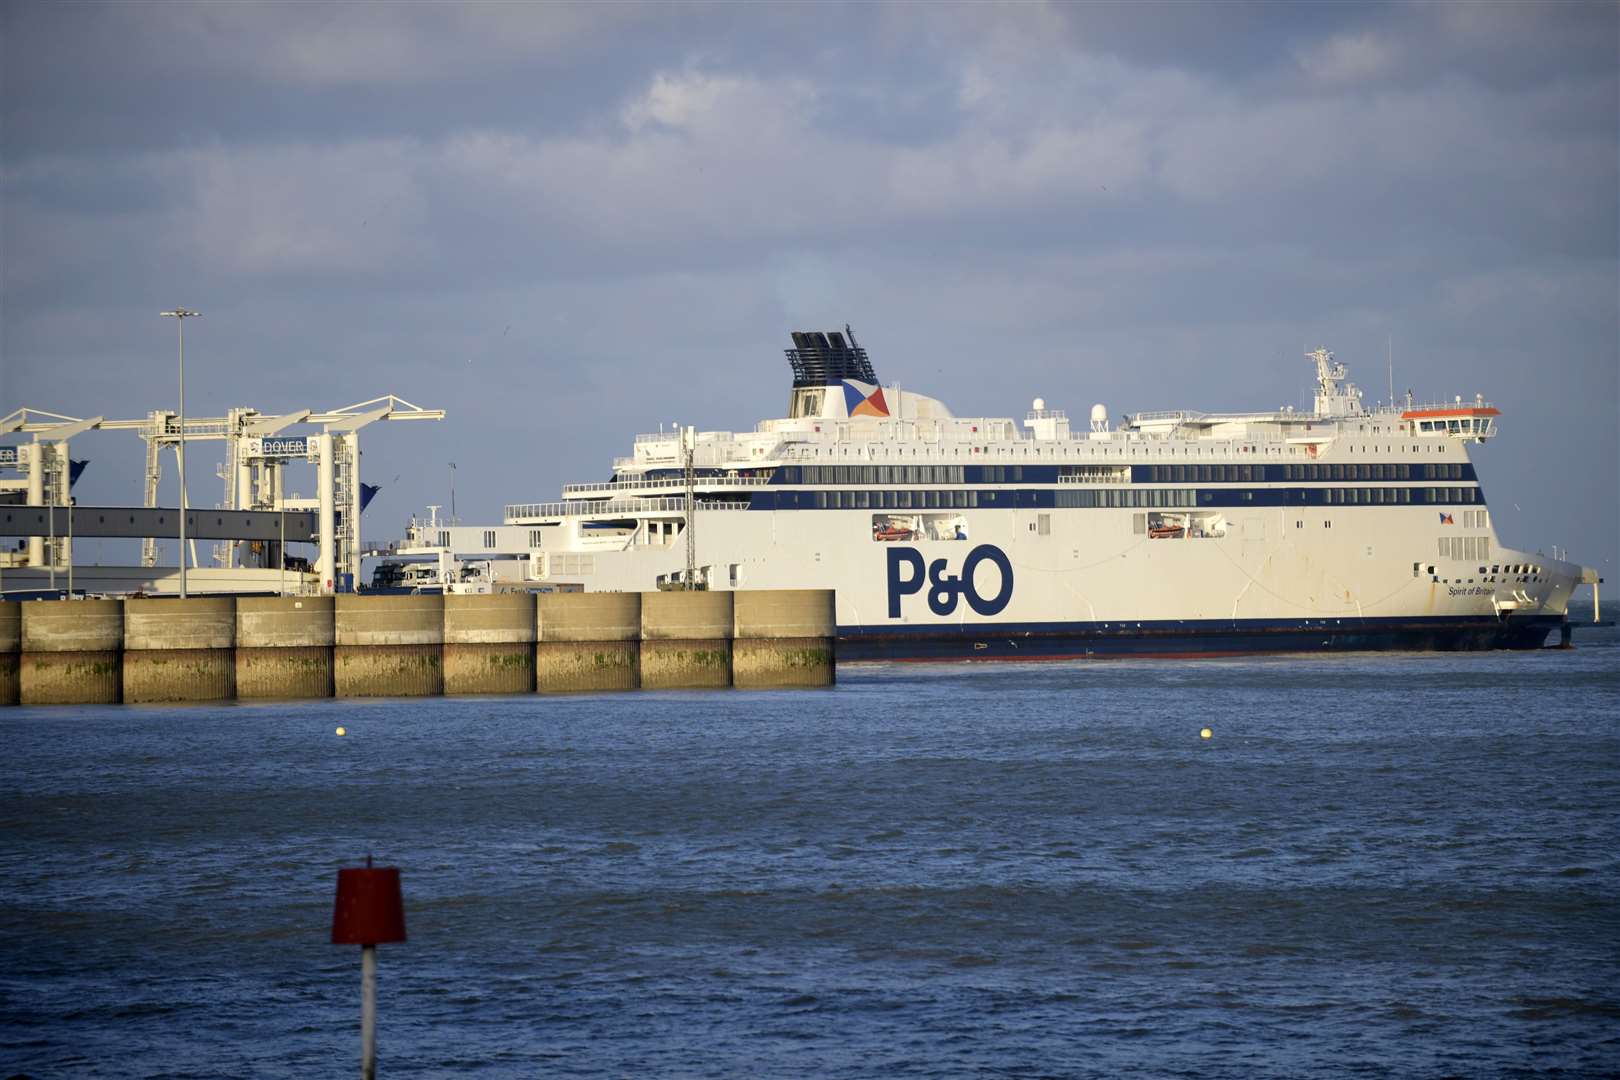 P&O Ferries, based in Dover, announced plans to make more than 1,000 people redundant in May